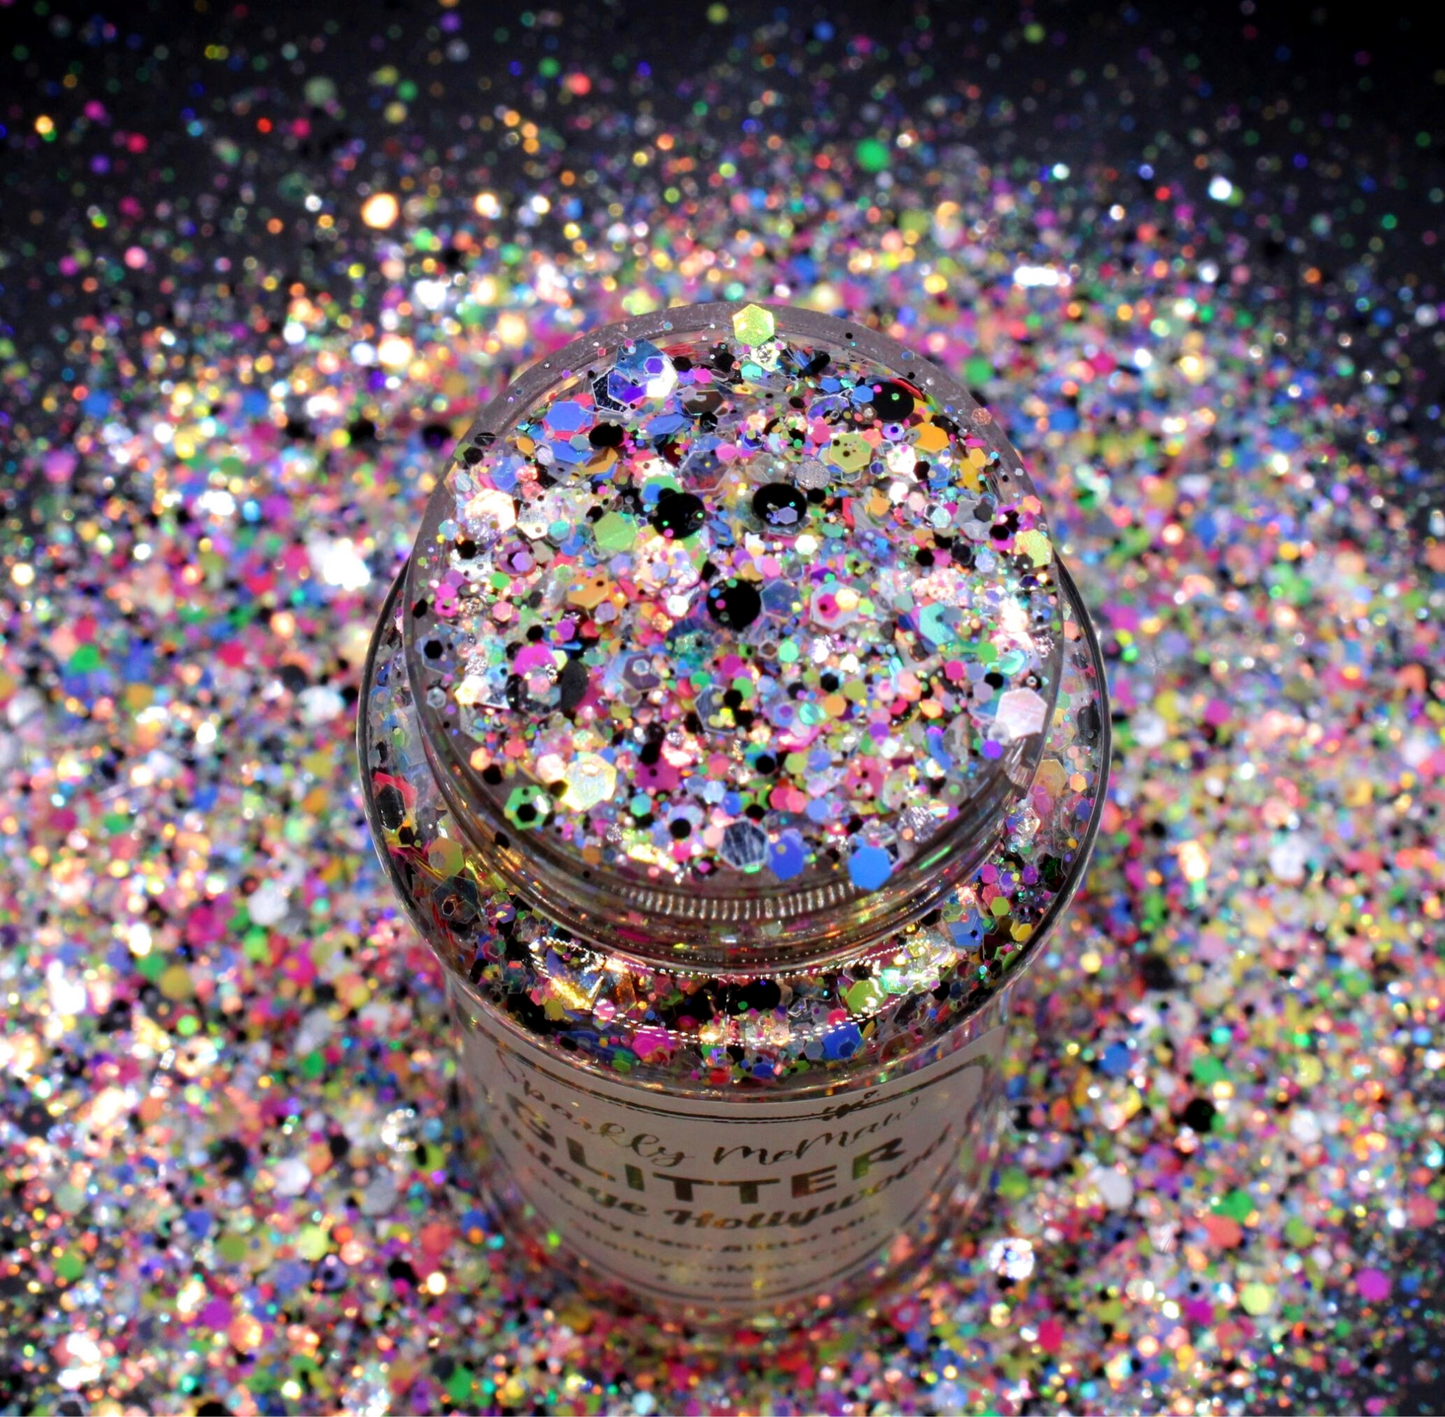 Vintage Hollywood Chunky Neon Glitter Mix